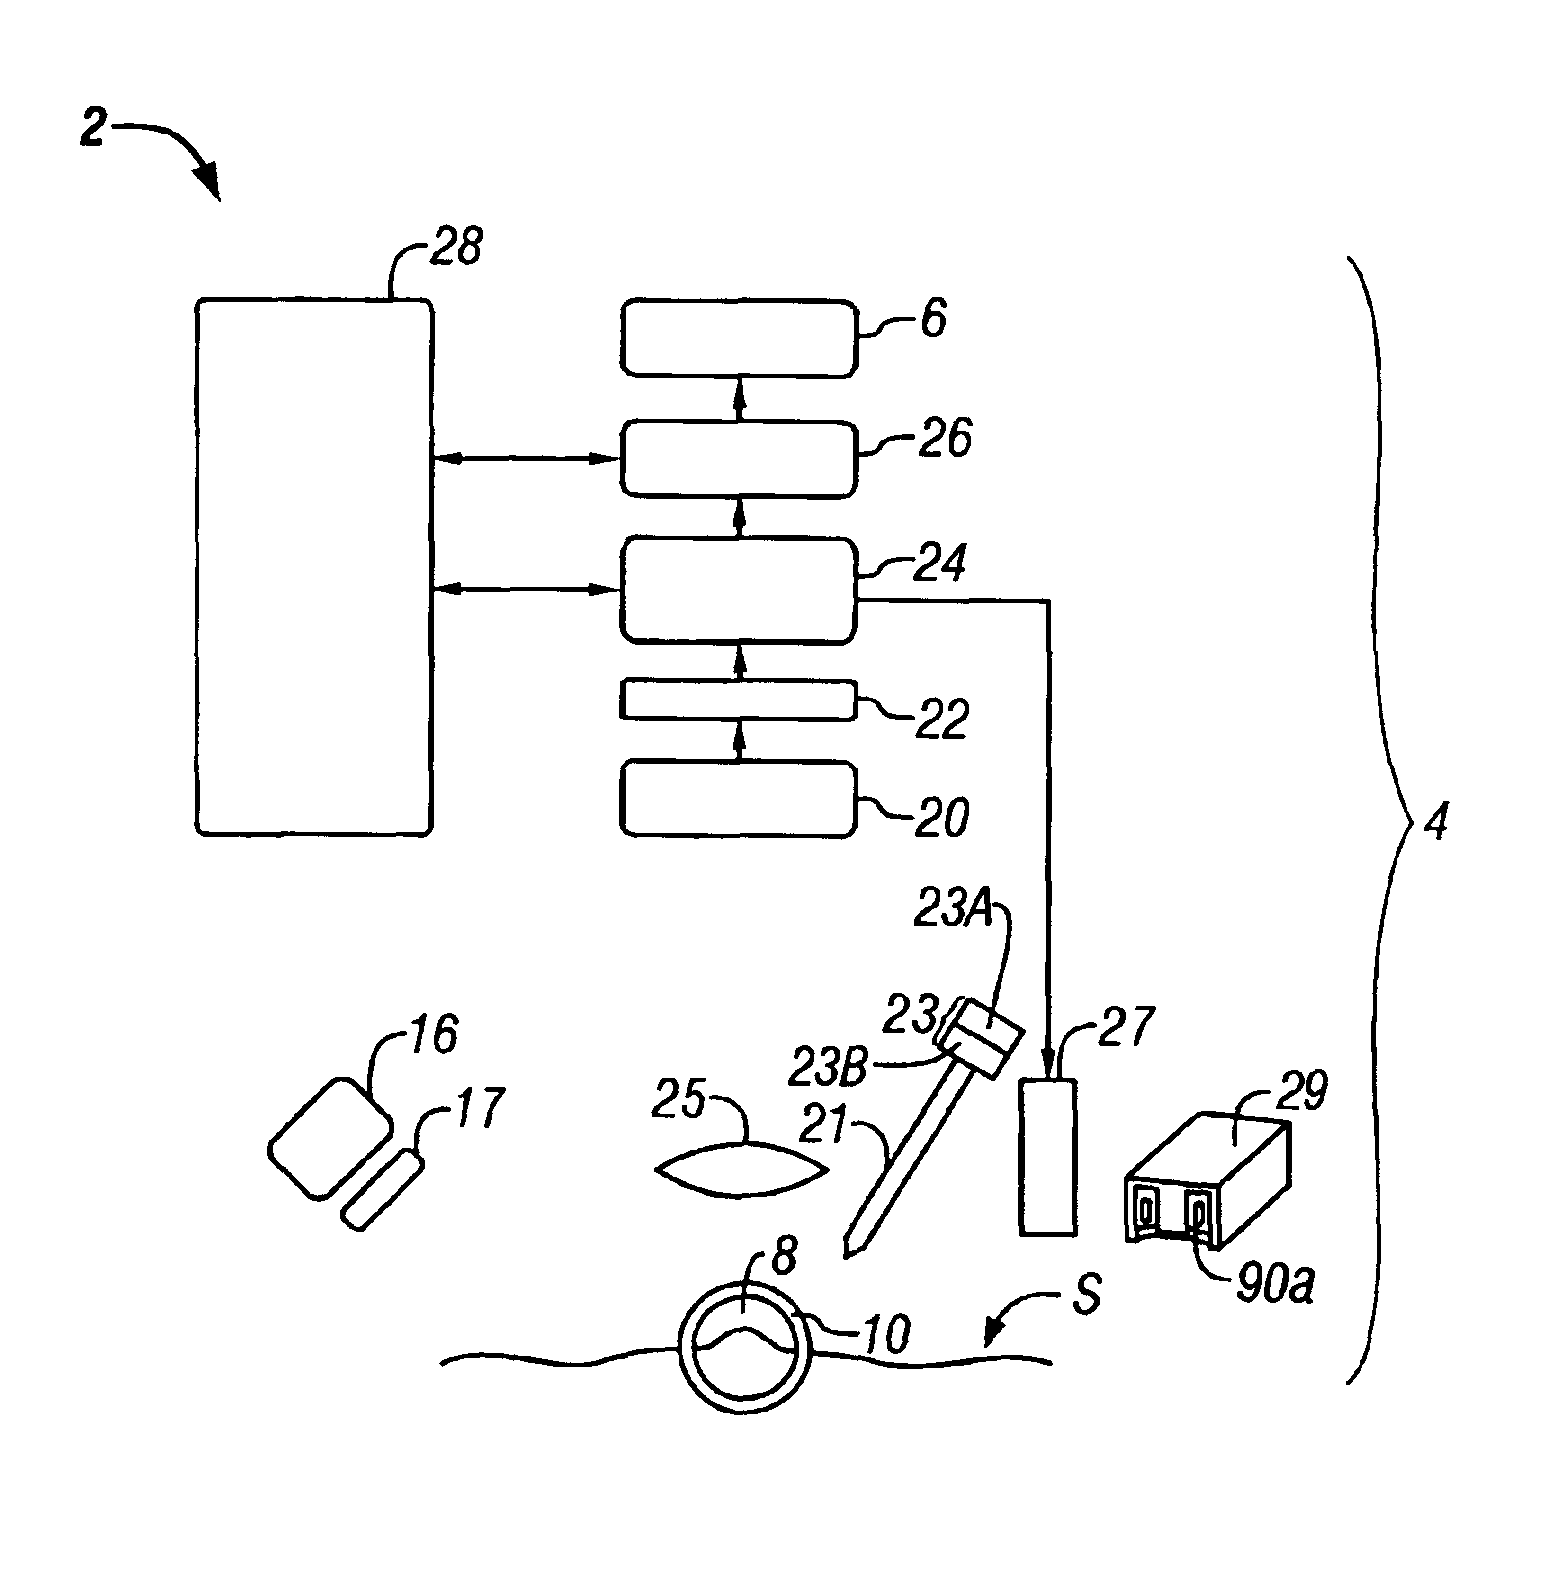 Analyte concentration determination devices and methods of using the same